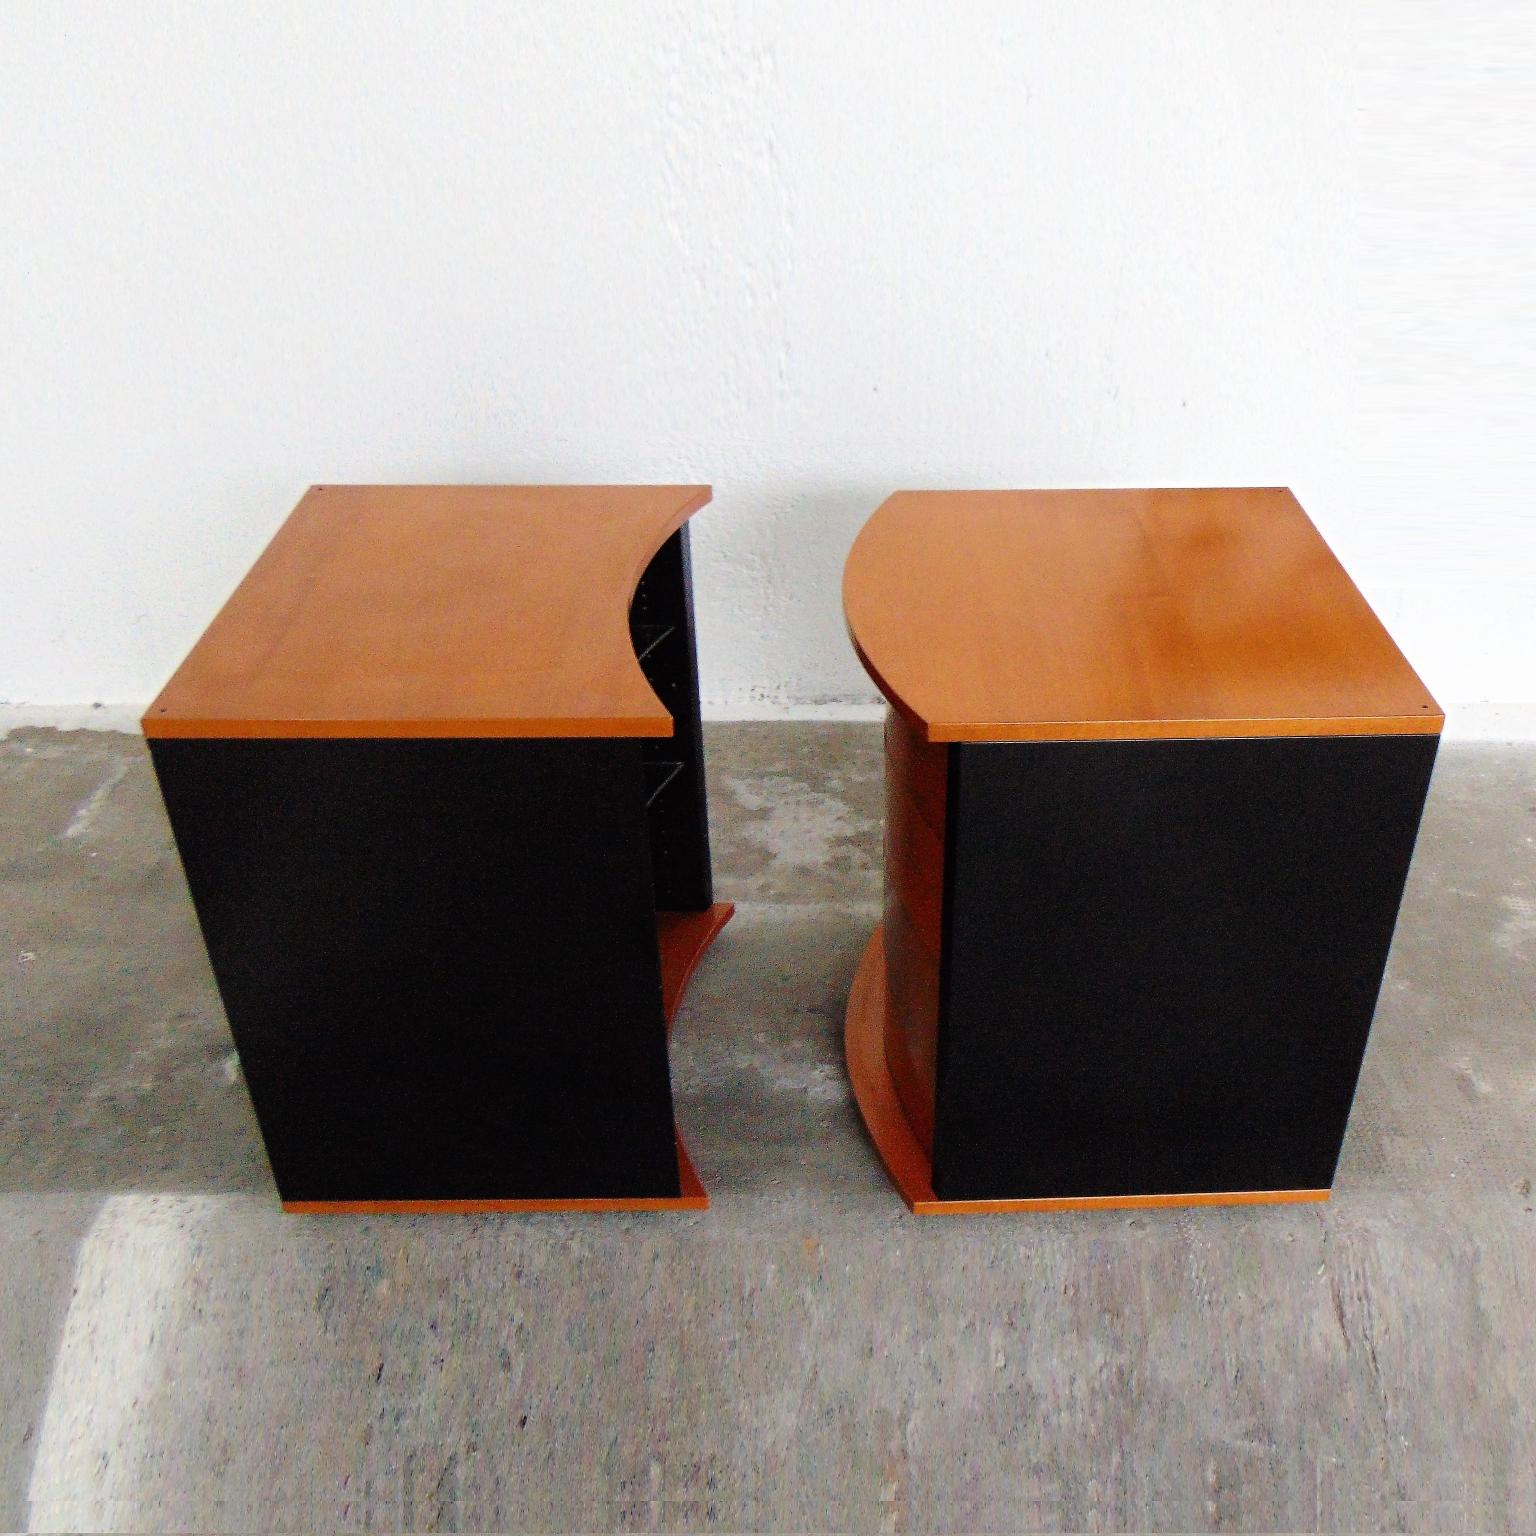 1990s Set of 2 Nightstands Walnut Stained Cherry and Black Lacquer, Roche Bobois For Sale 9